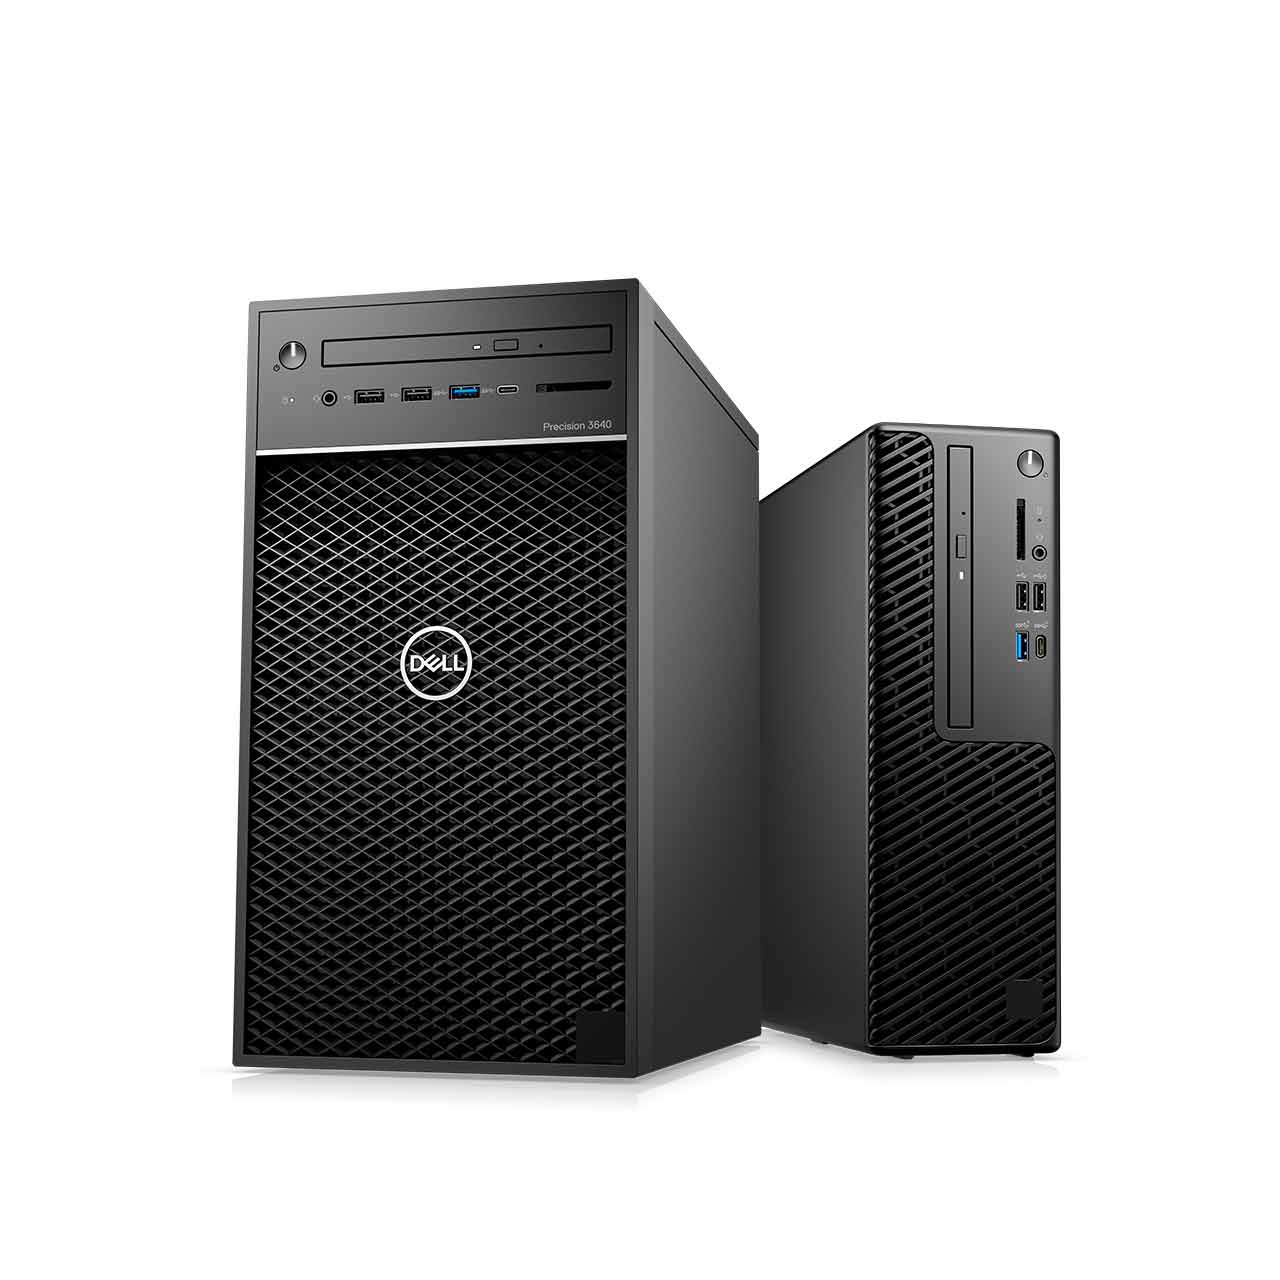 The Latest Dell Precision Workstations Are All New on The Inside